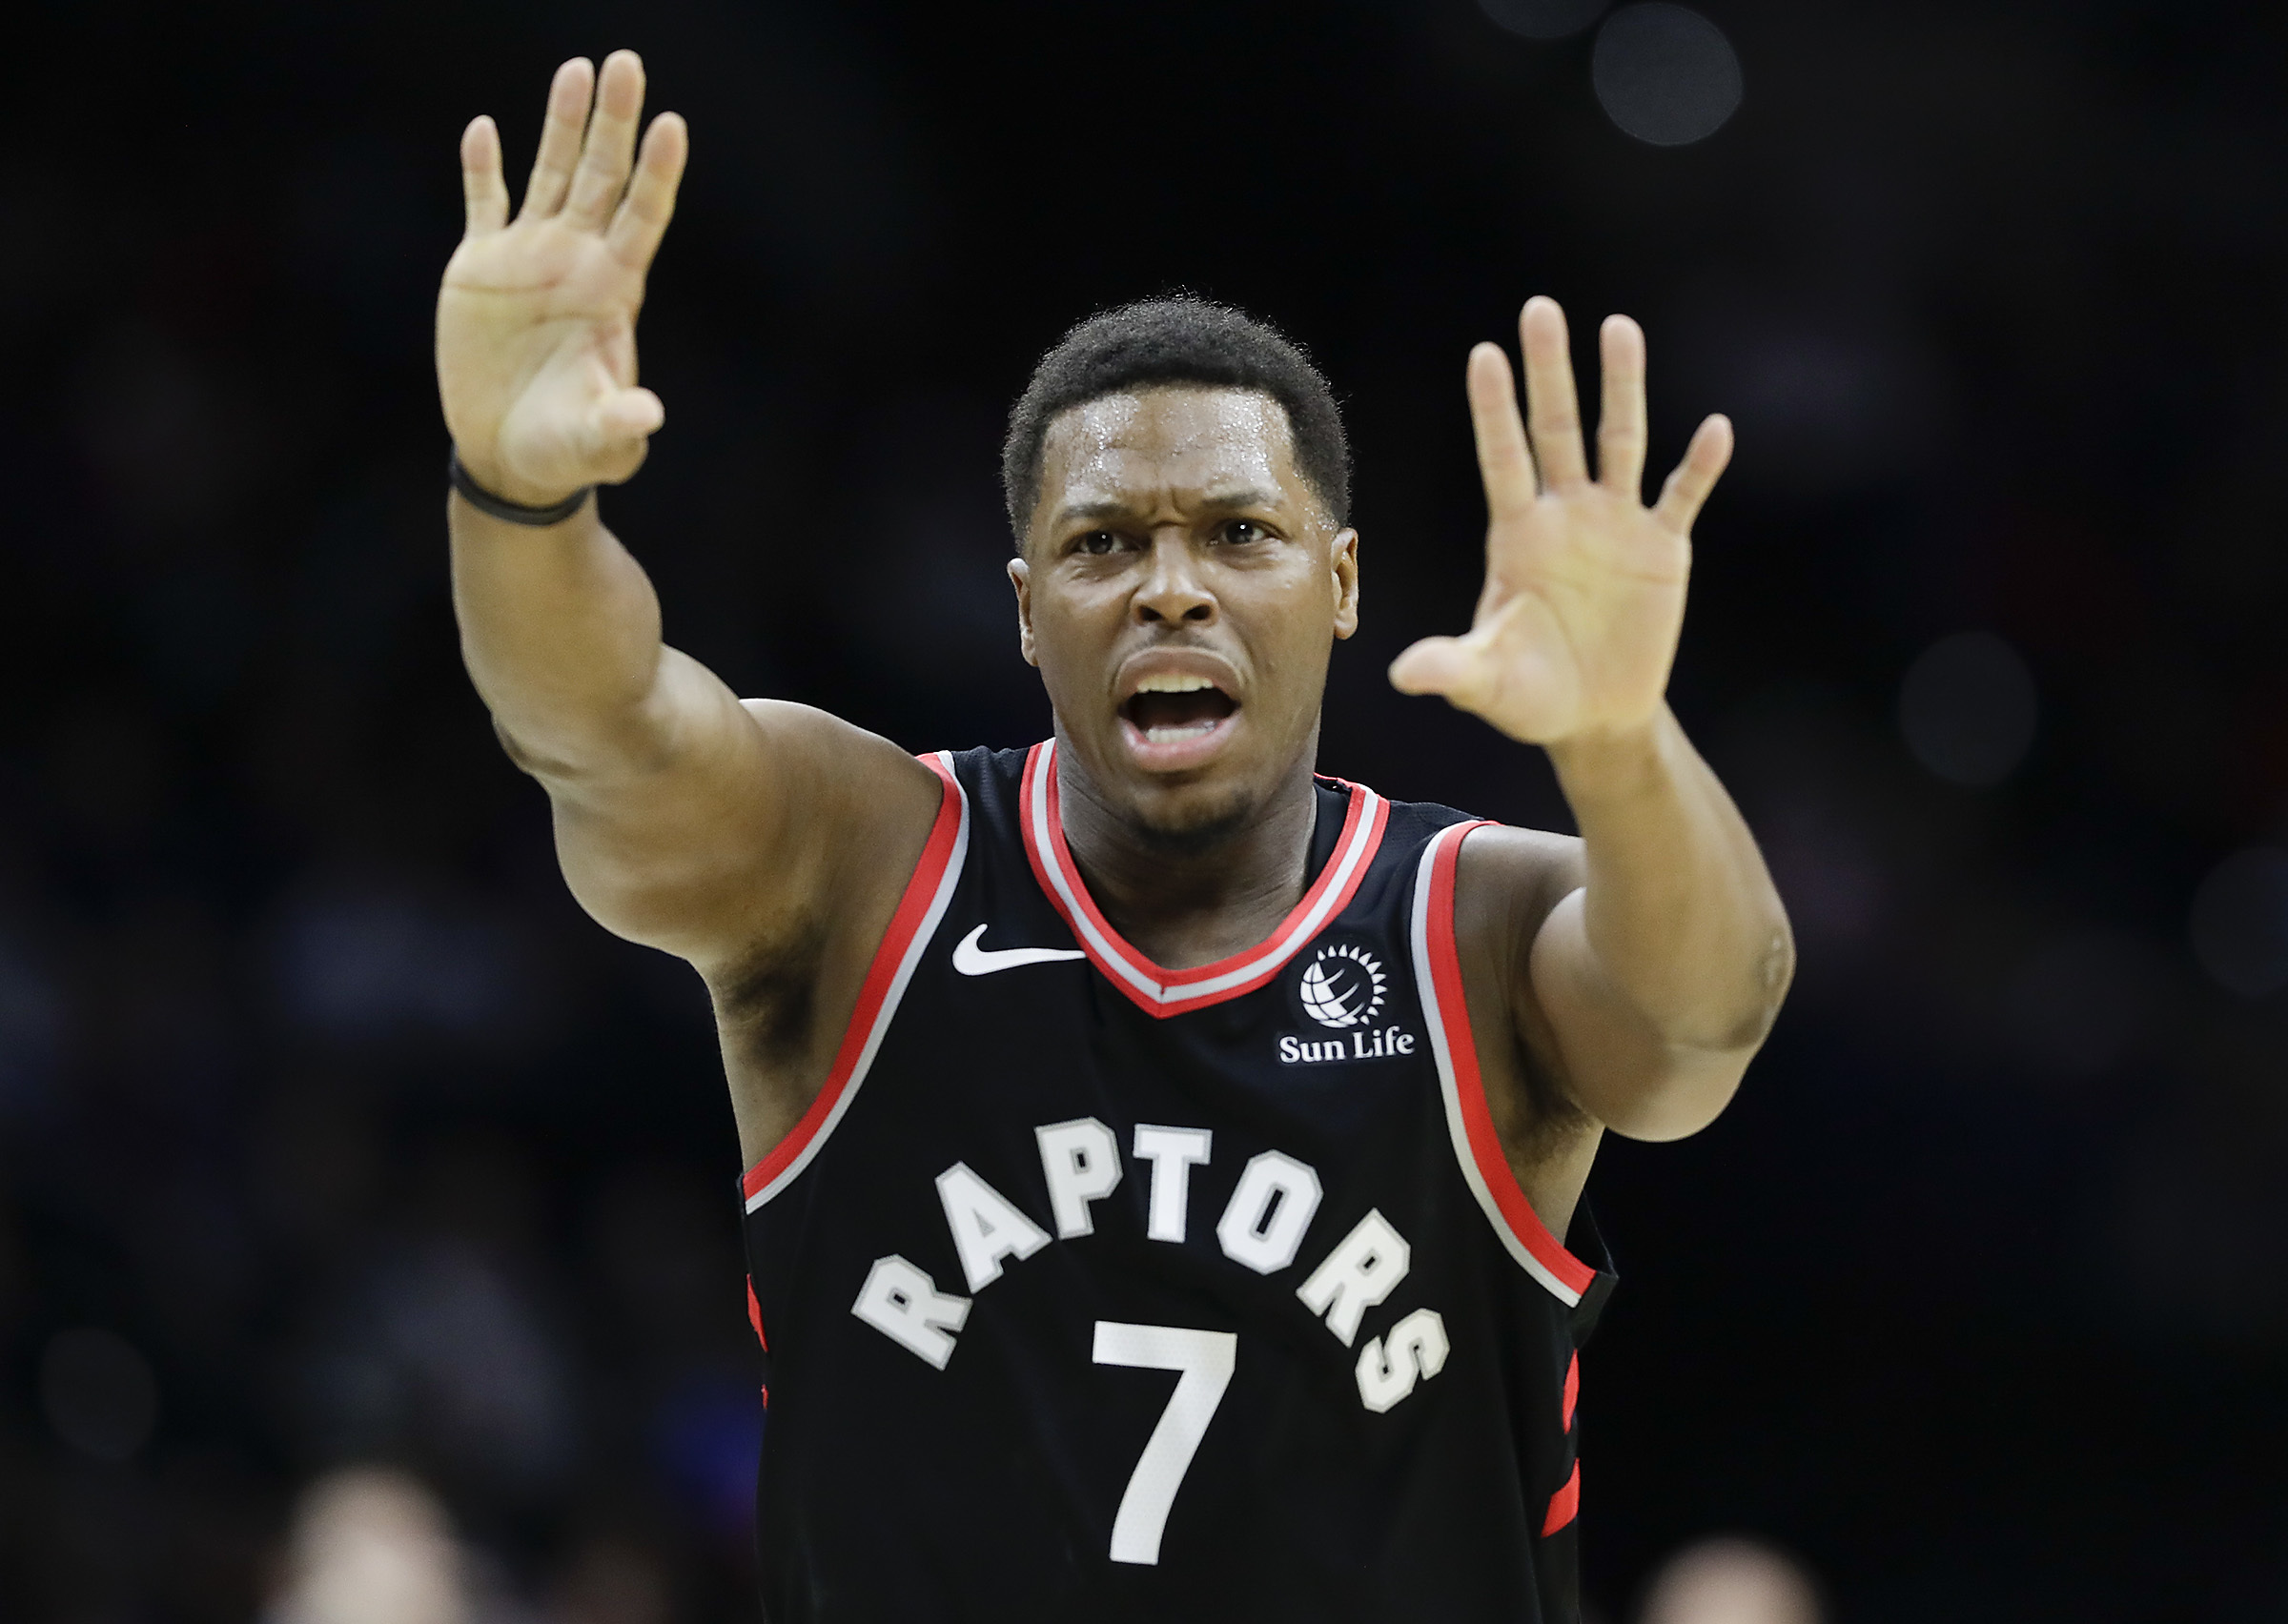 Kyle Lowry's No. 7 Jersey to Be Retired by Raptors After His